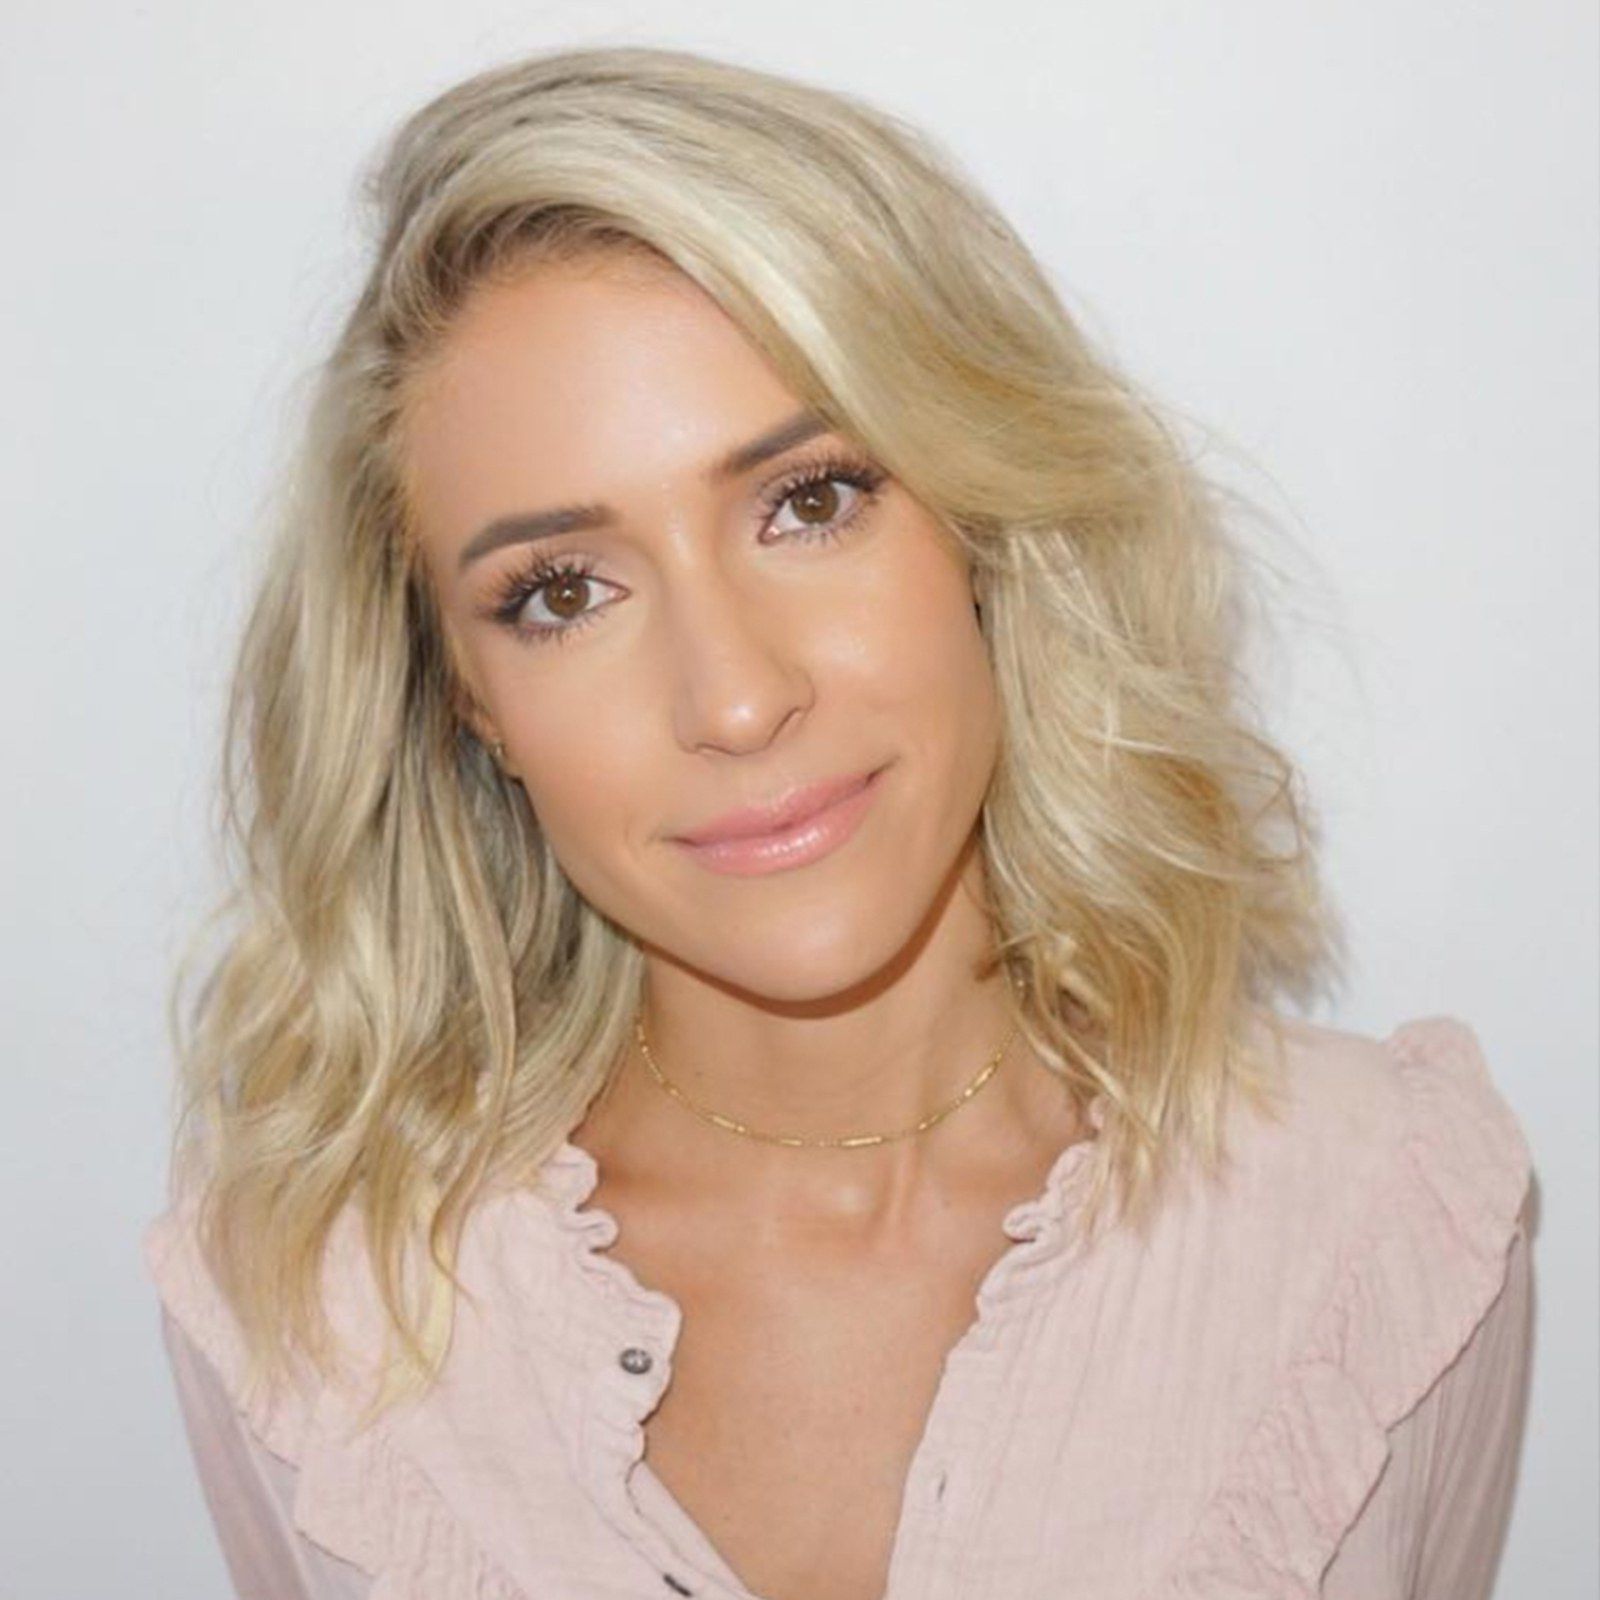 37 Chicest Lob Haircuts For 2018 – Glamour Regarding Kristin Cavallari Short Hairstyles (View 6 of 25)